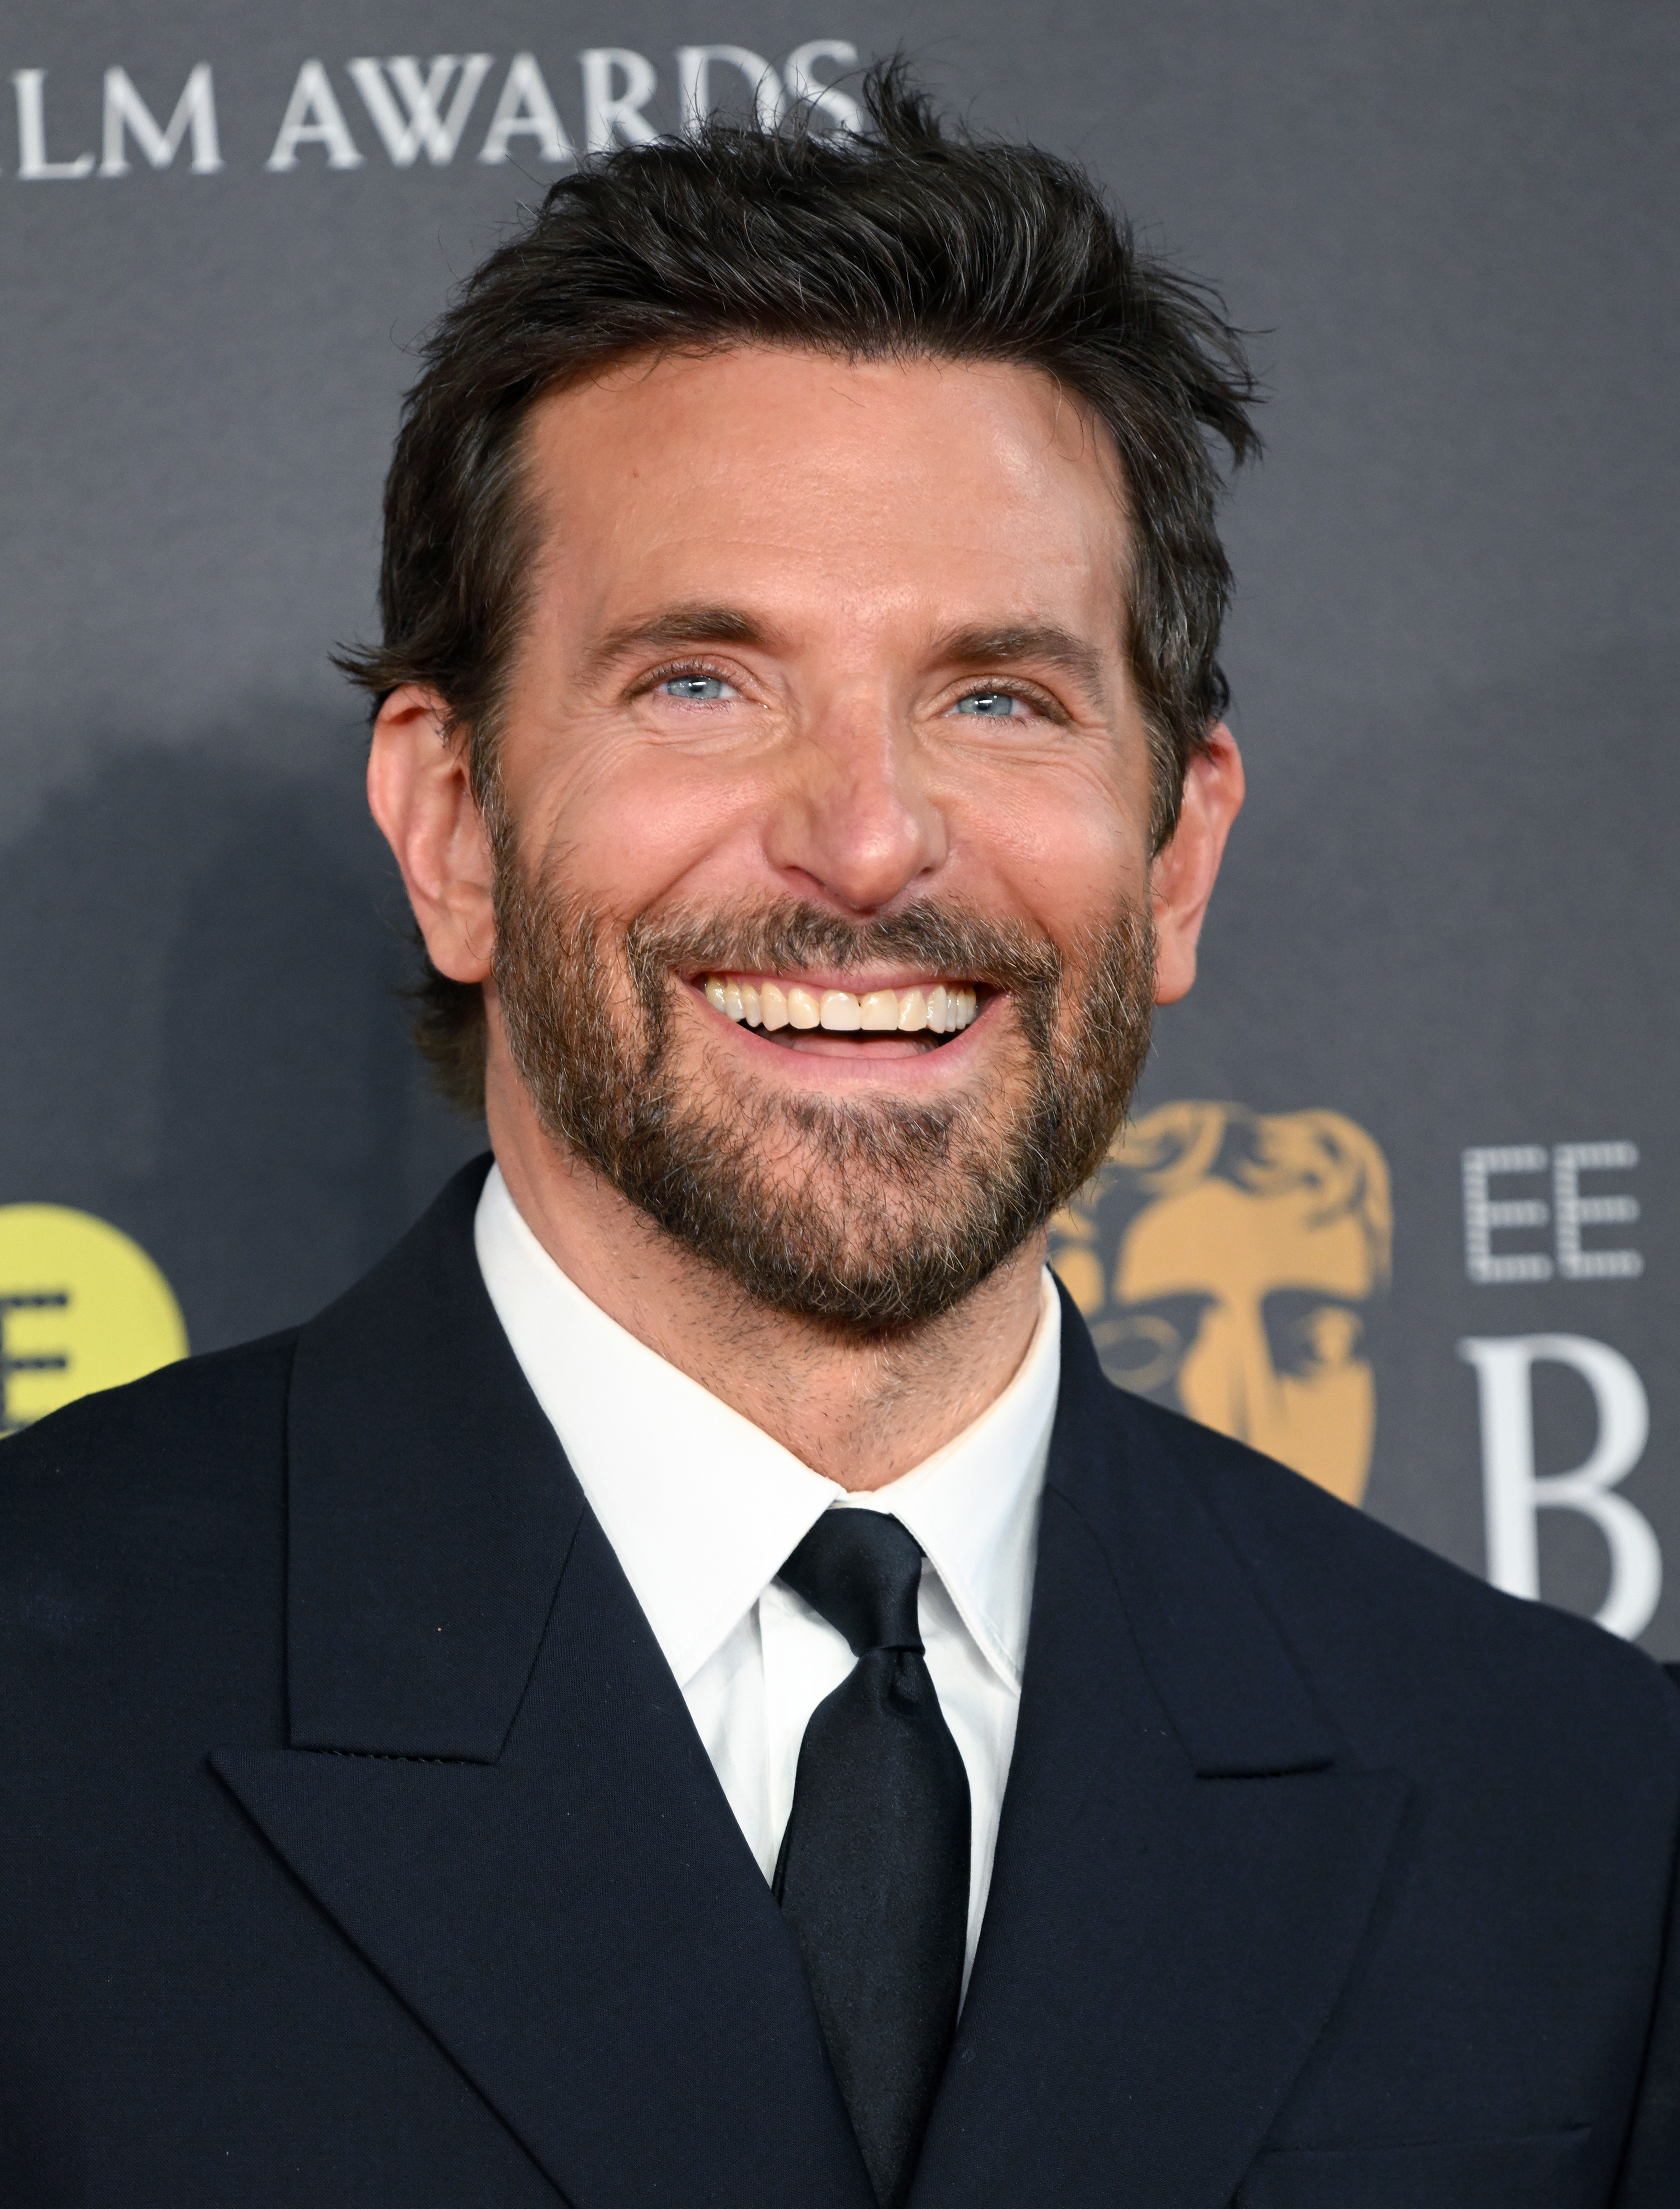 Bradley smiling in a classic black suit with a tie at a media event